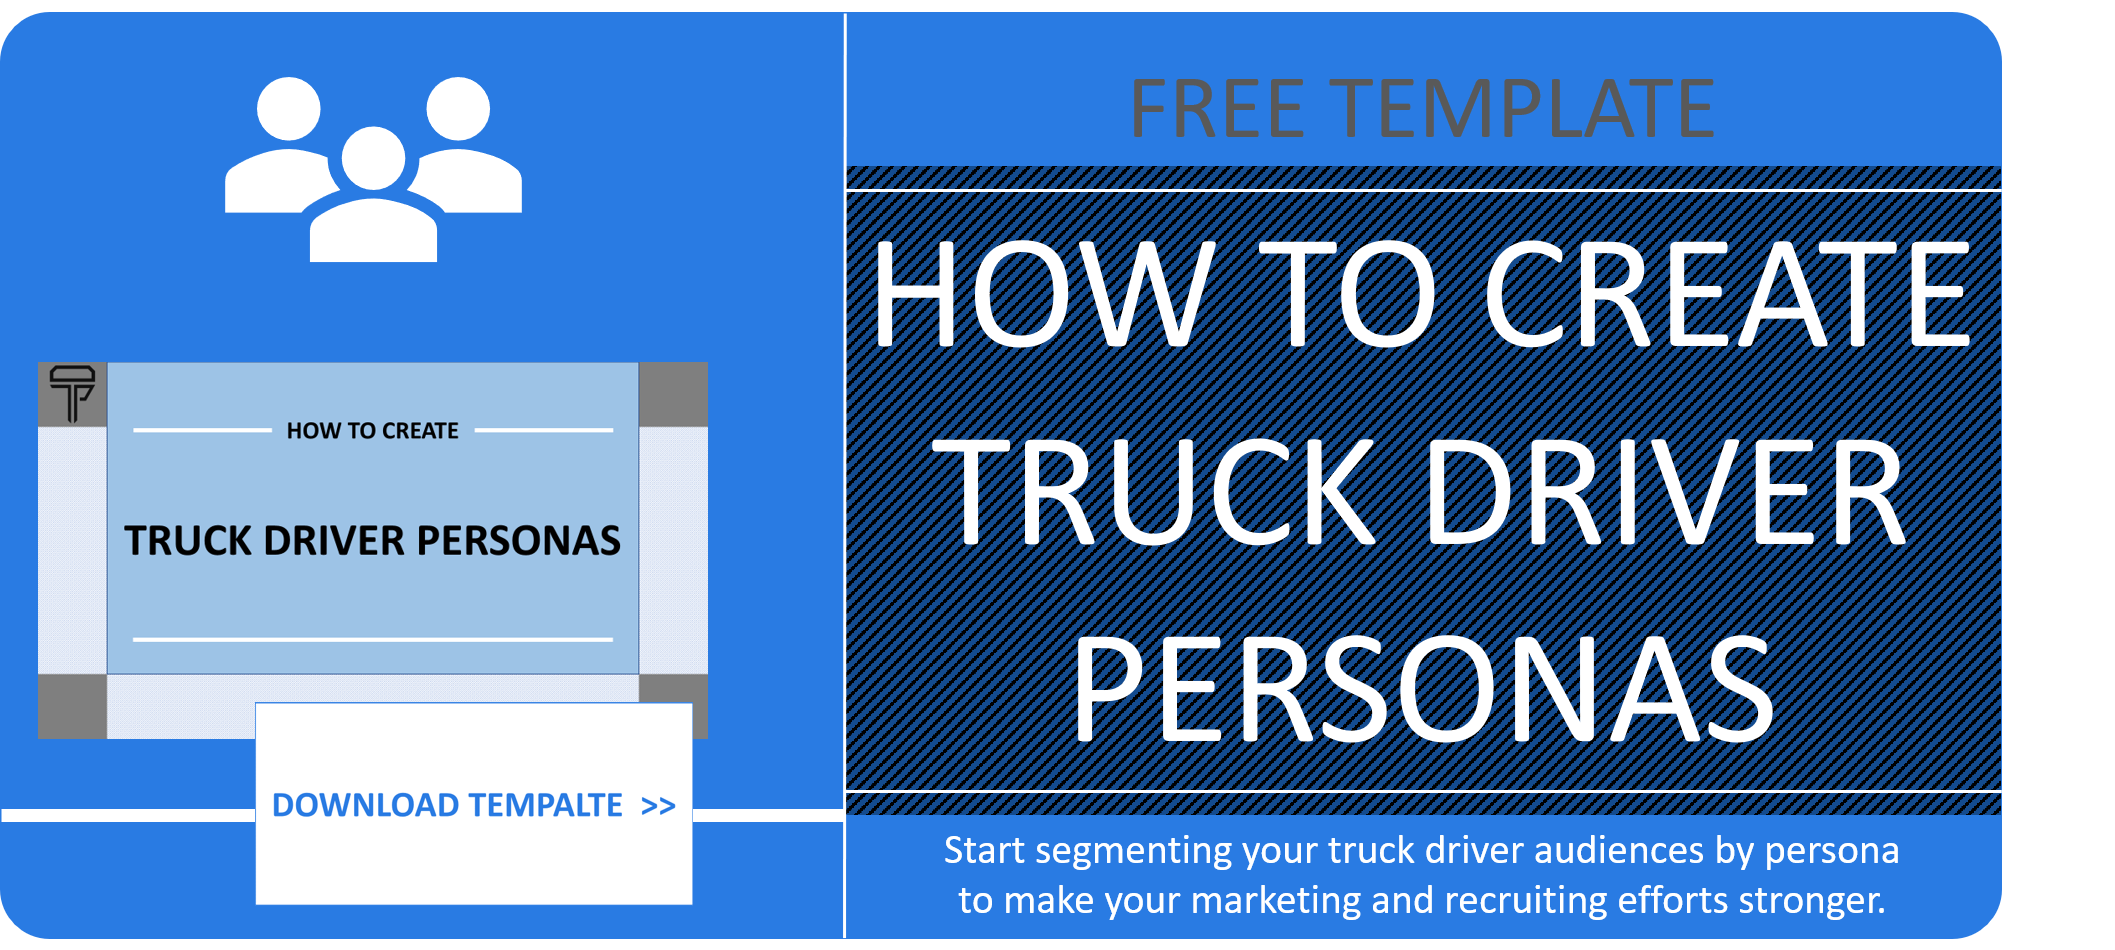 How to create truck driver personas workbook